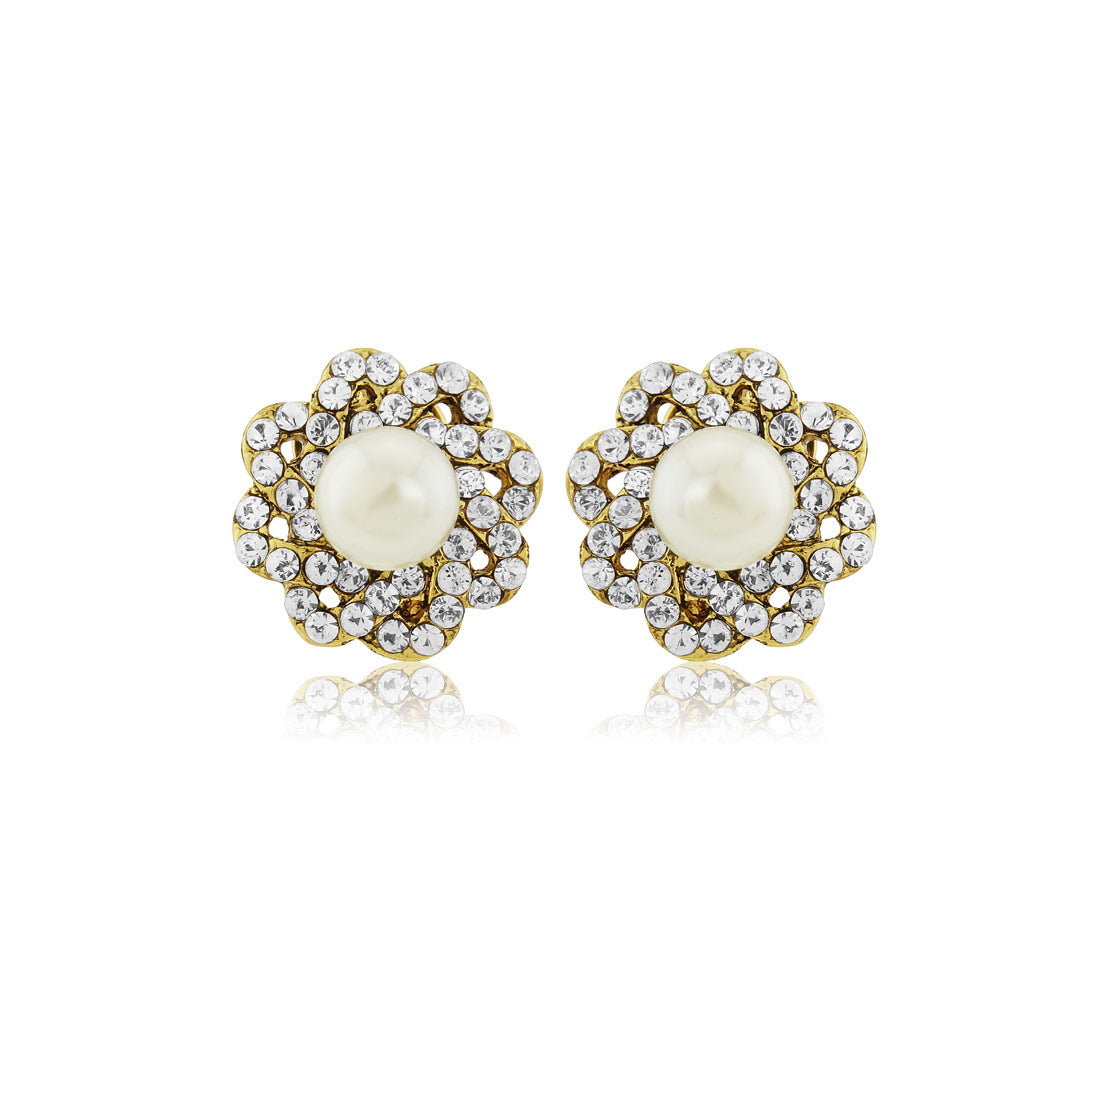 Shimmer of Gold Crystal & Pearl Clip On Earrings for Weddings & Occasions